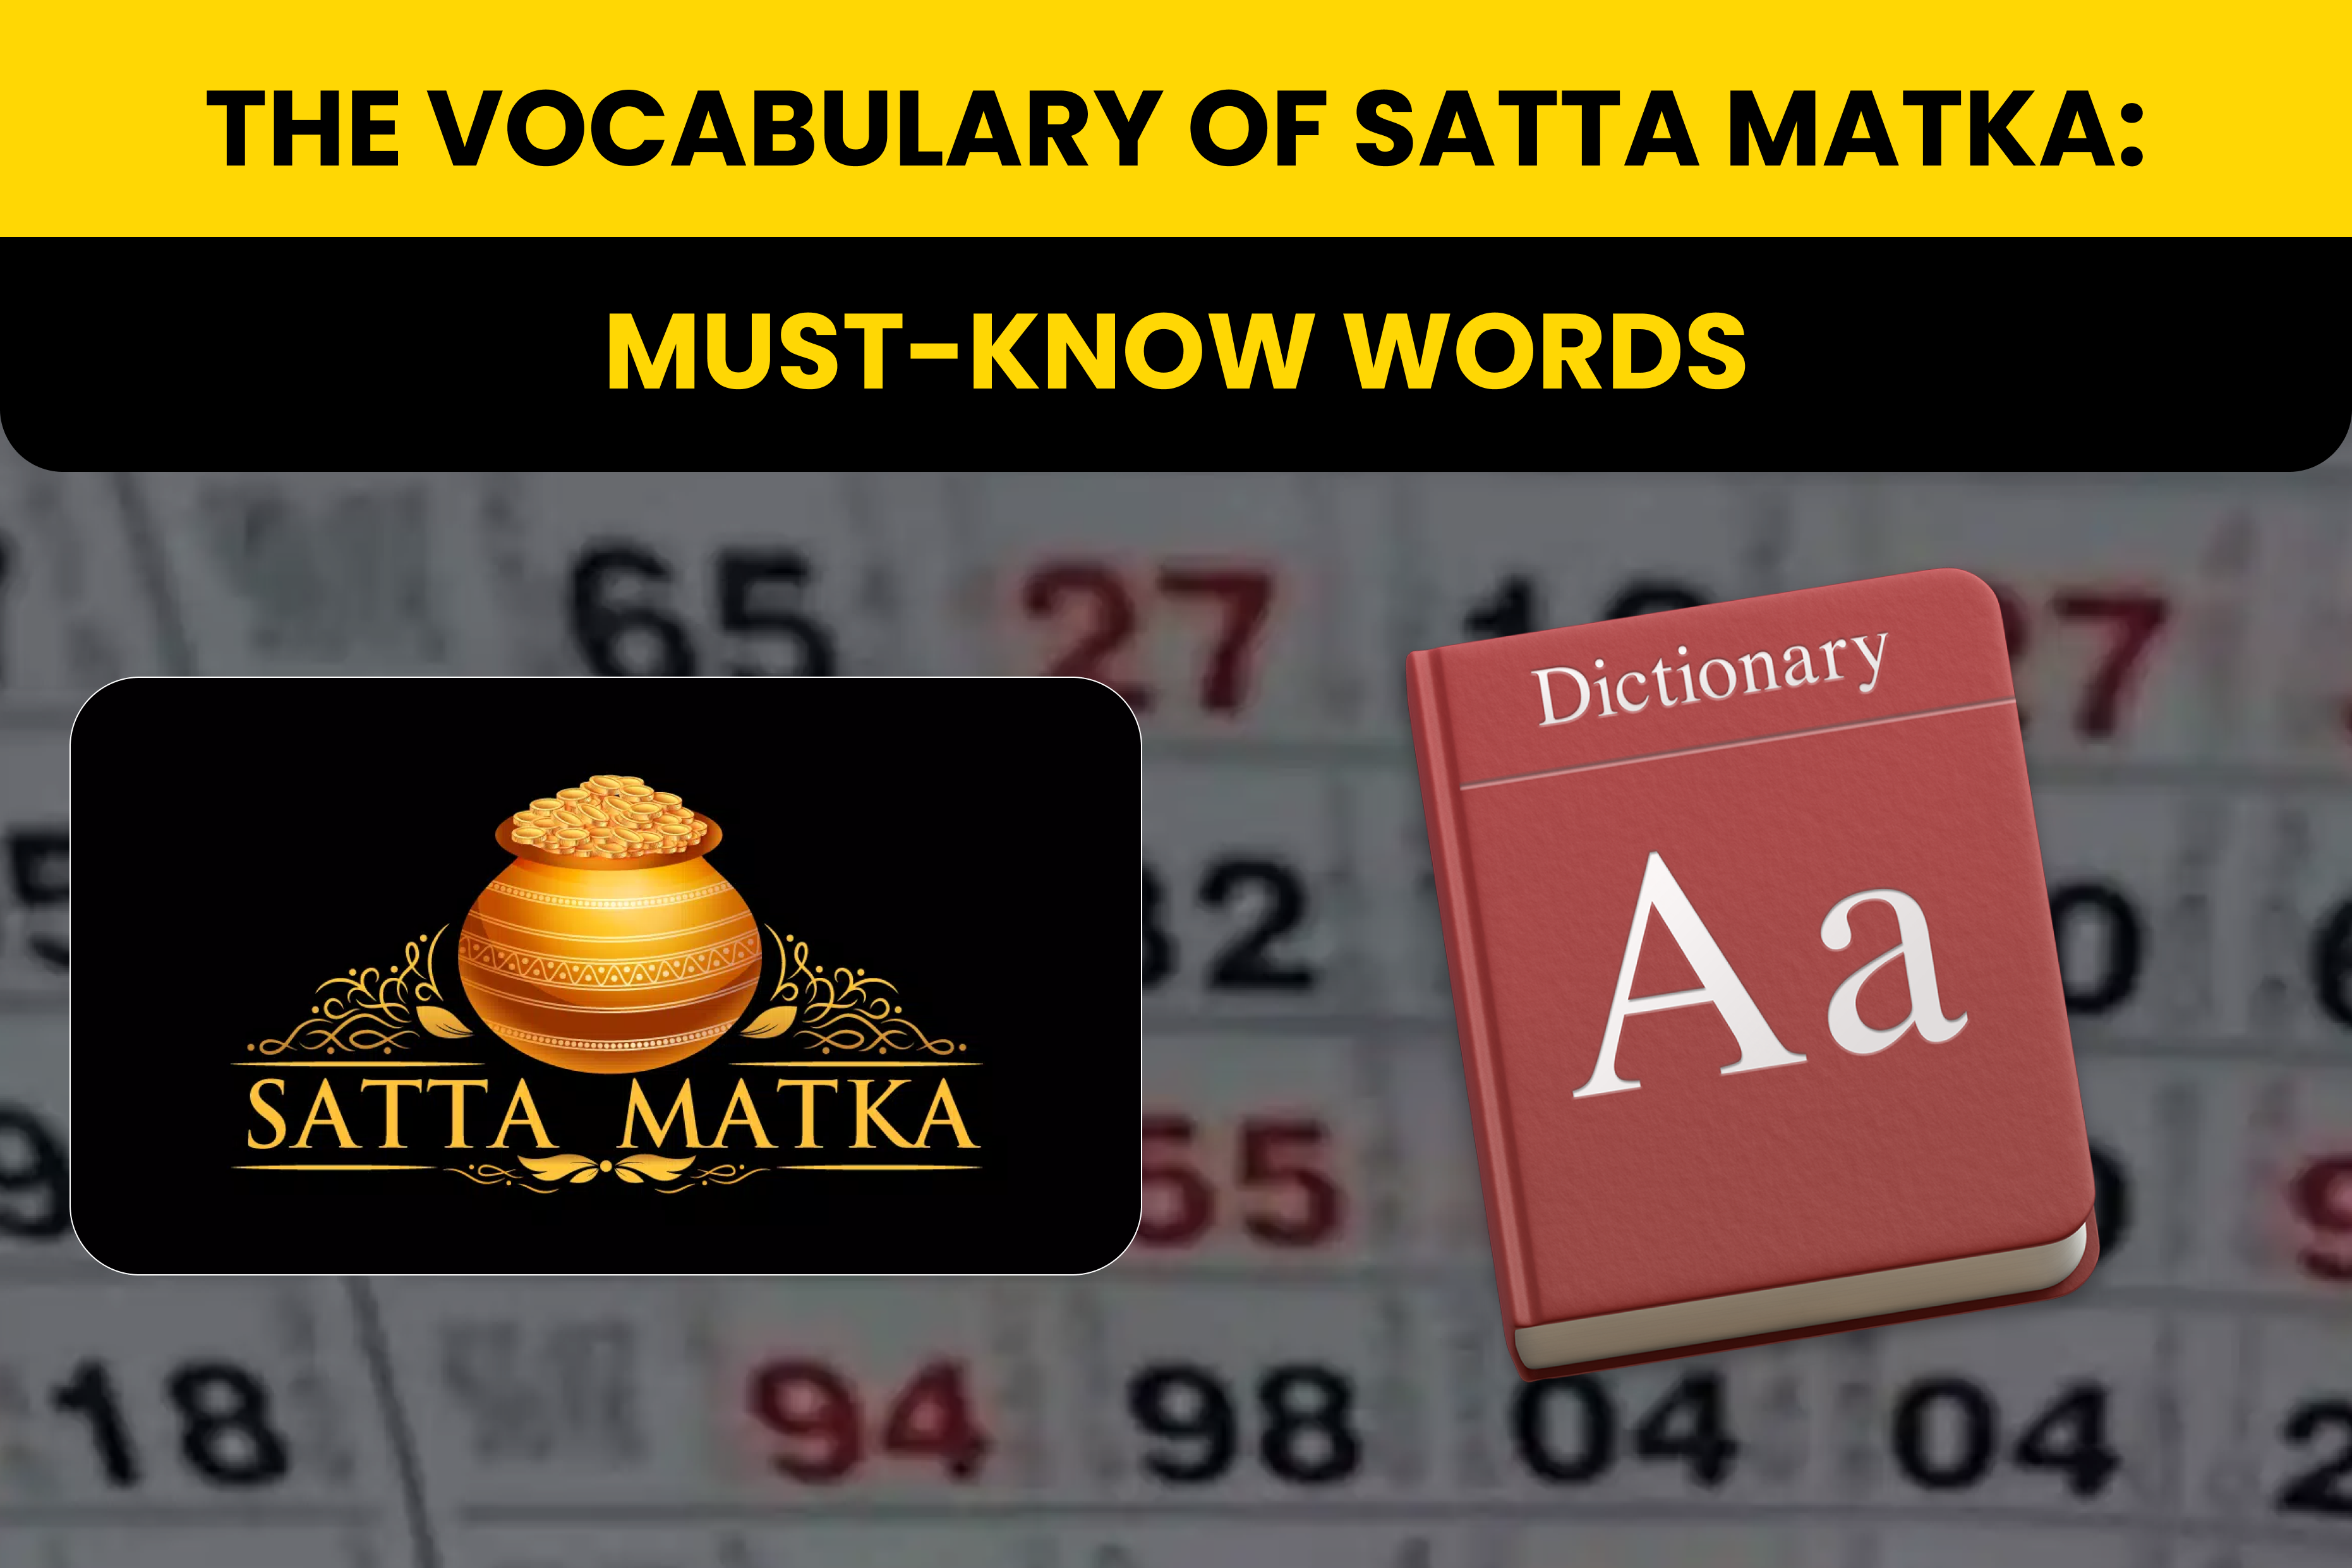 The Vocabulary of Satta Matka: Must-Know Words